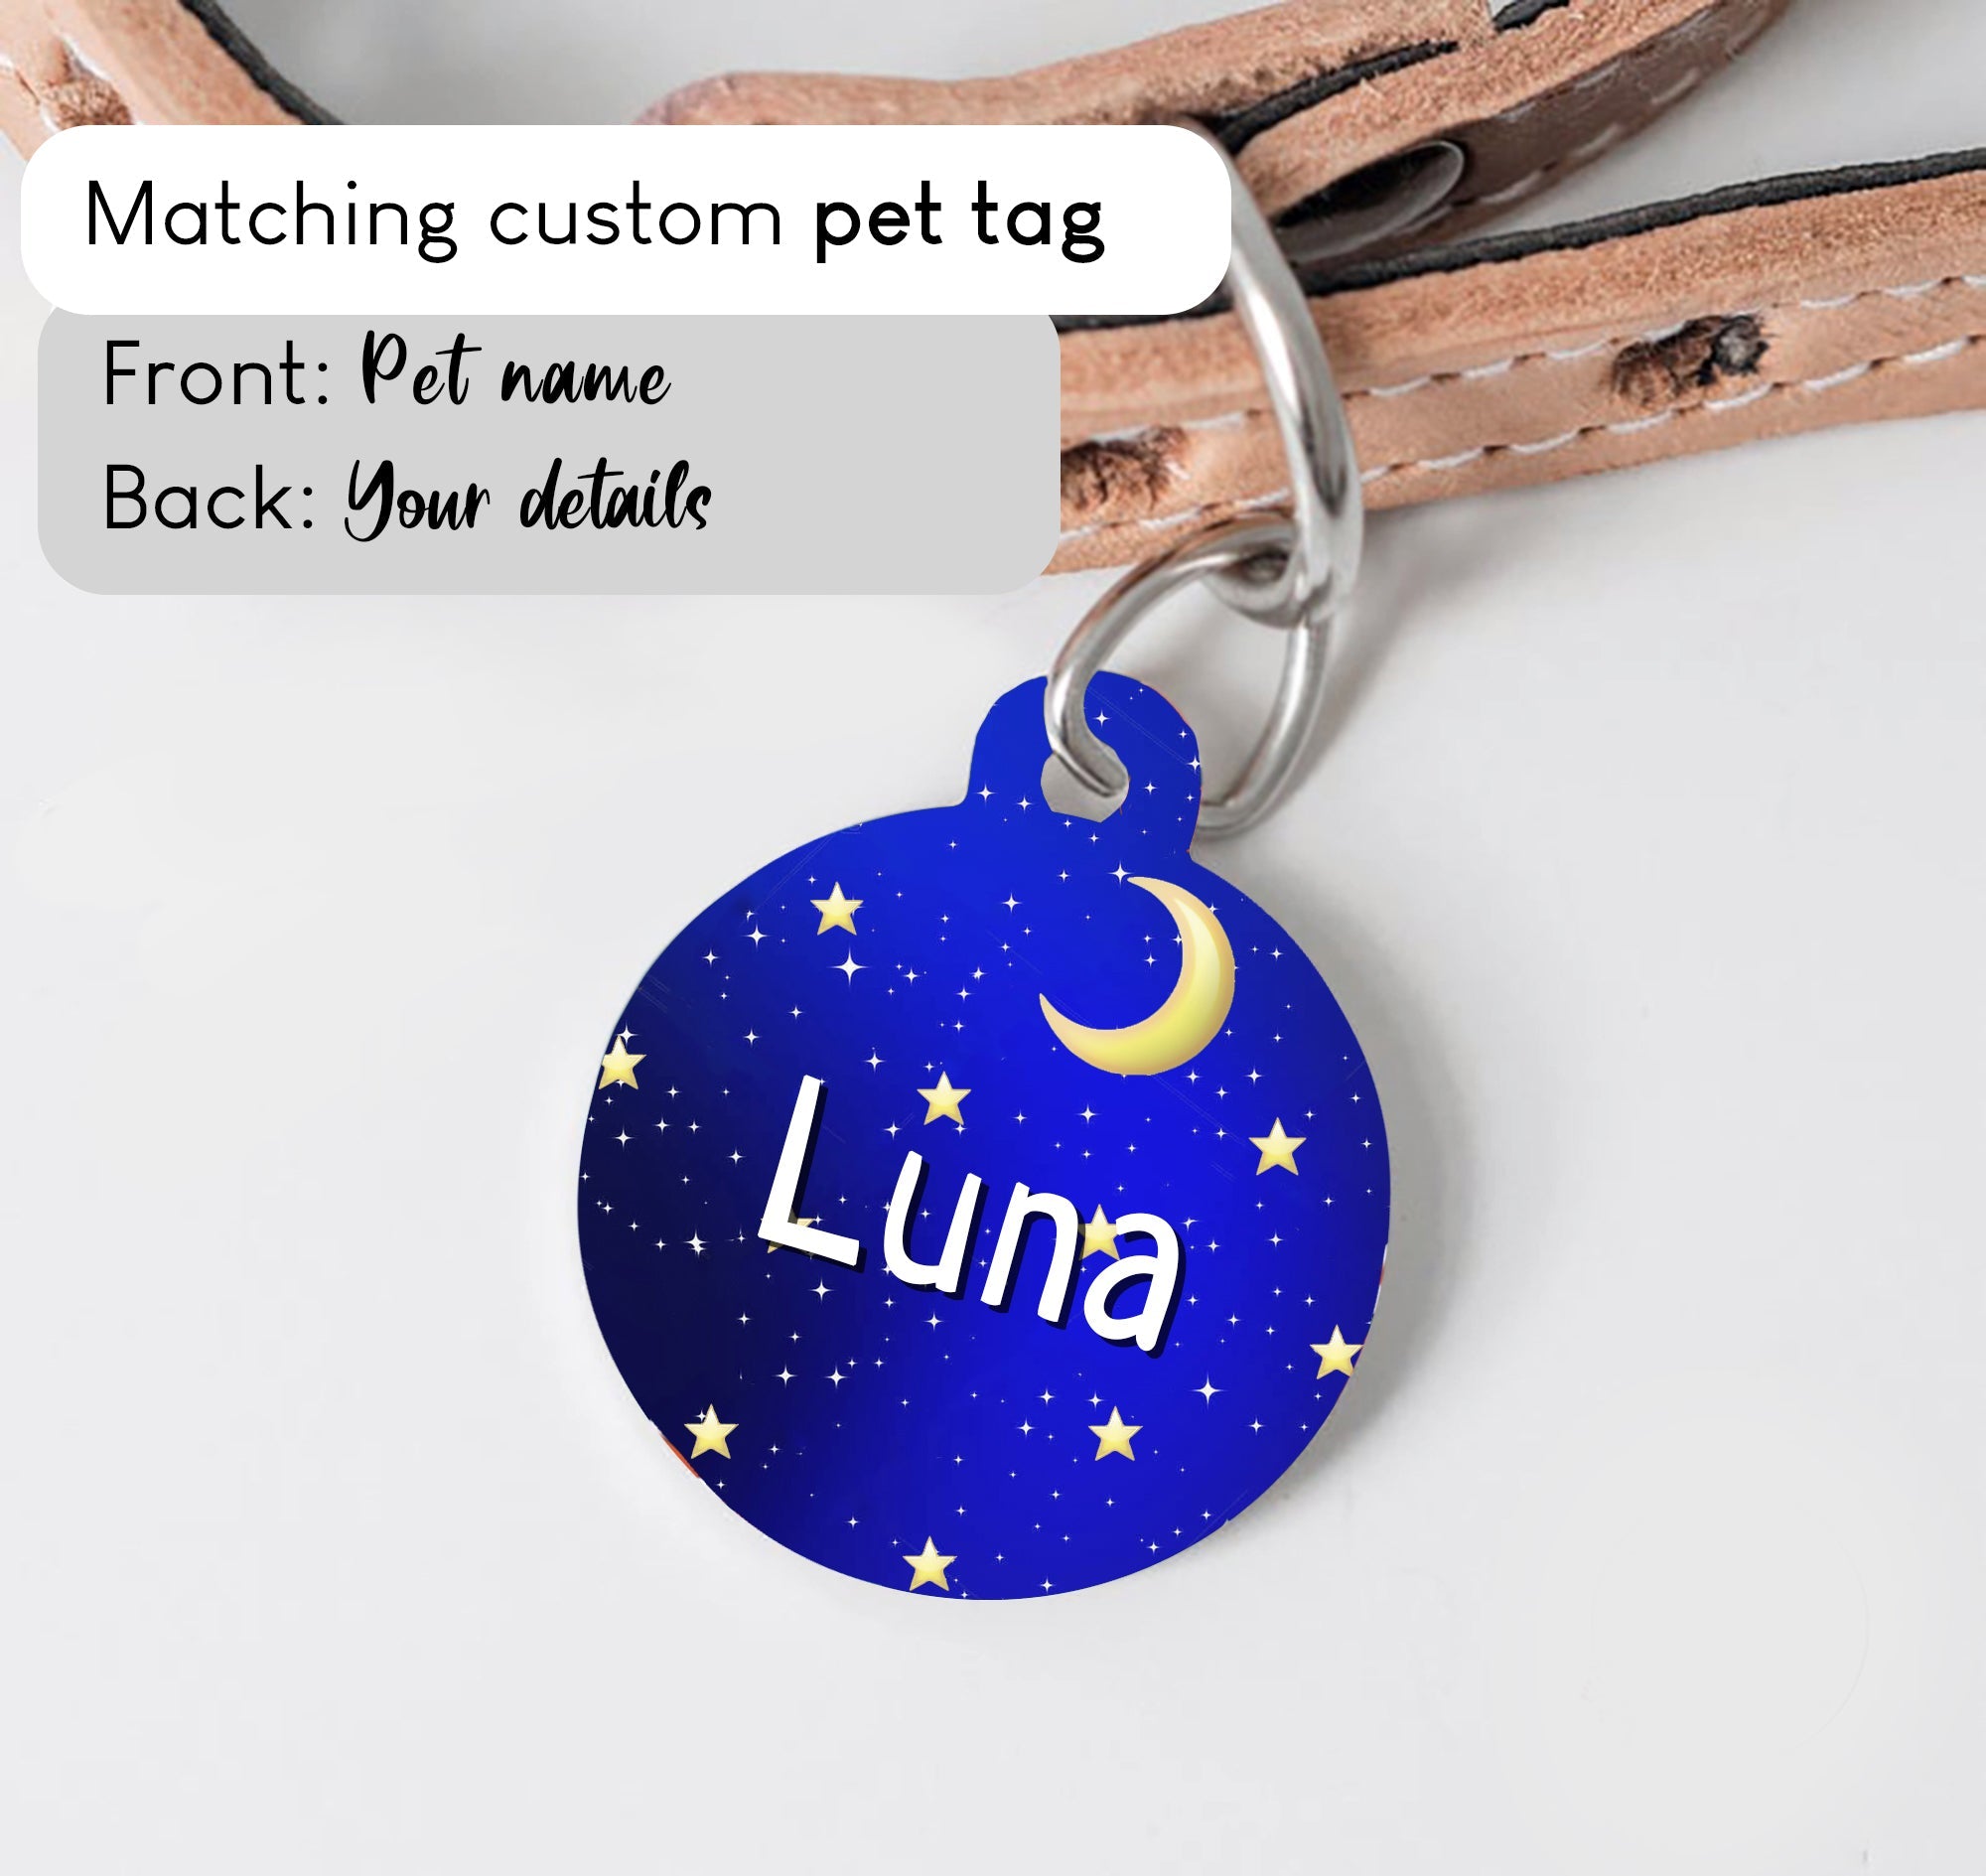 Starry Night Dog Collar - S-L sizes with custom matching pet tag - Adventures of Rubi